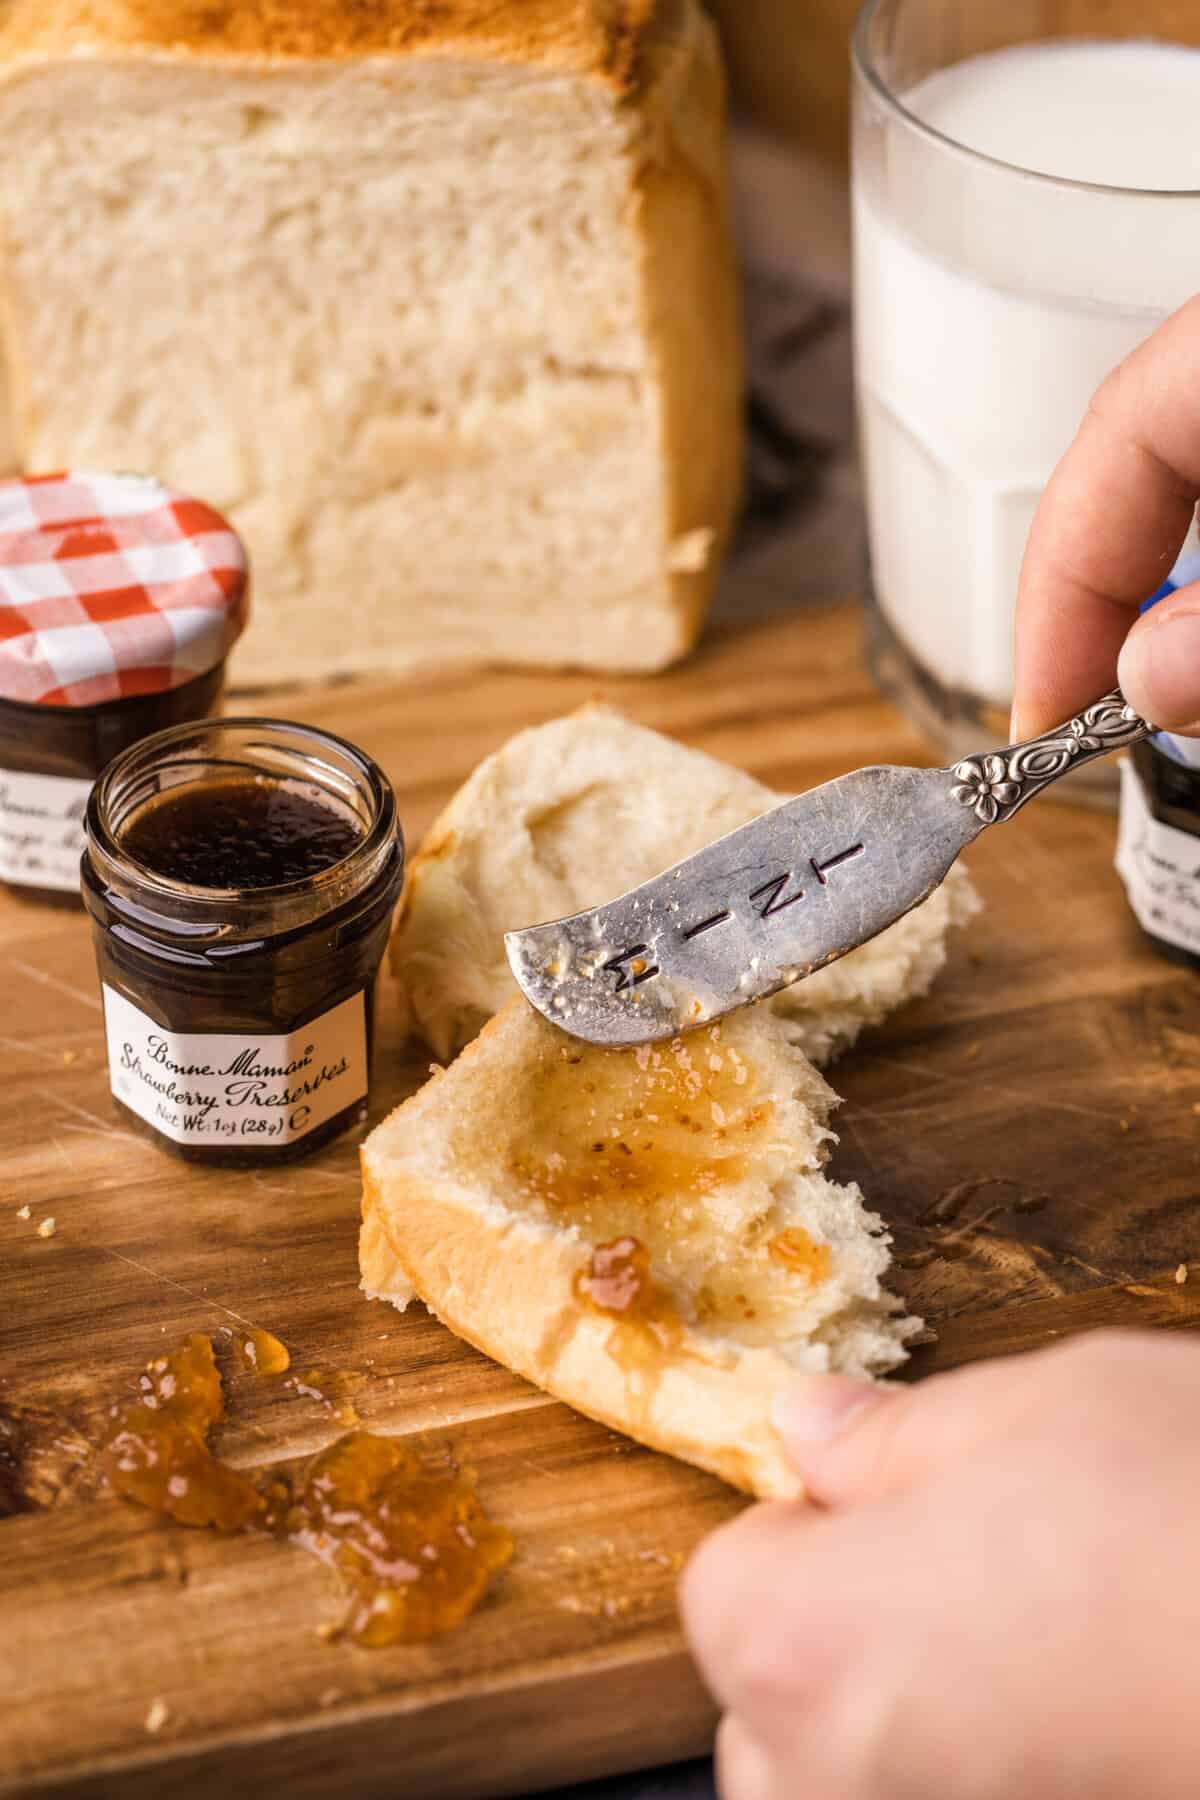 a girl is spreading jam onto a piece of Japanese milk bread with 2 other loaf of bread in the back ground. There are also a glass of milk and 3 small jars of jam.